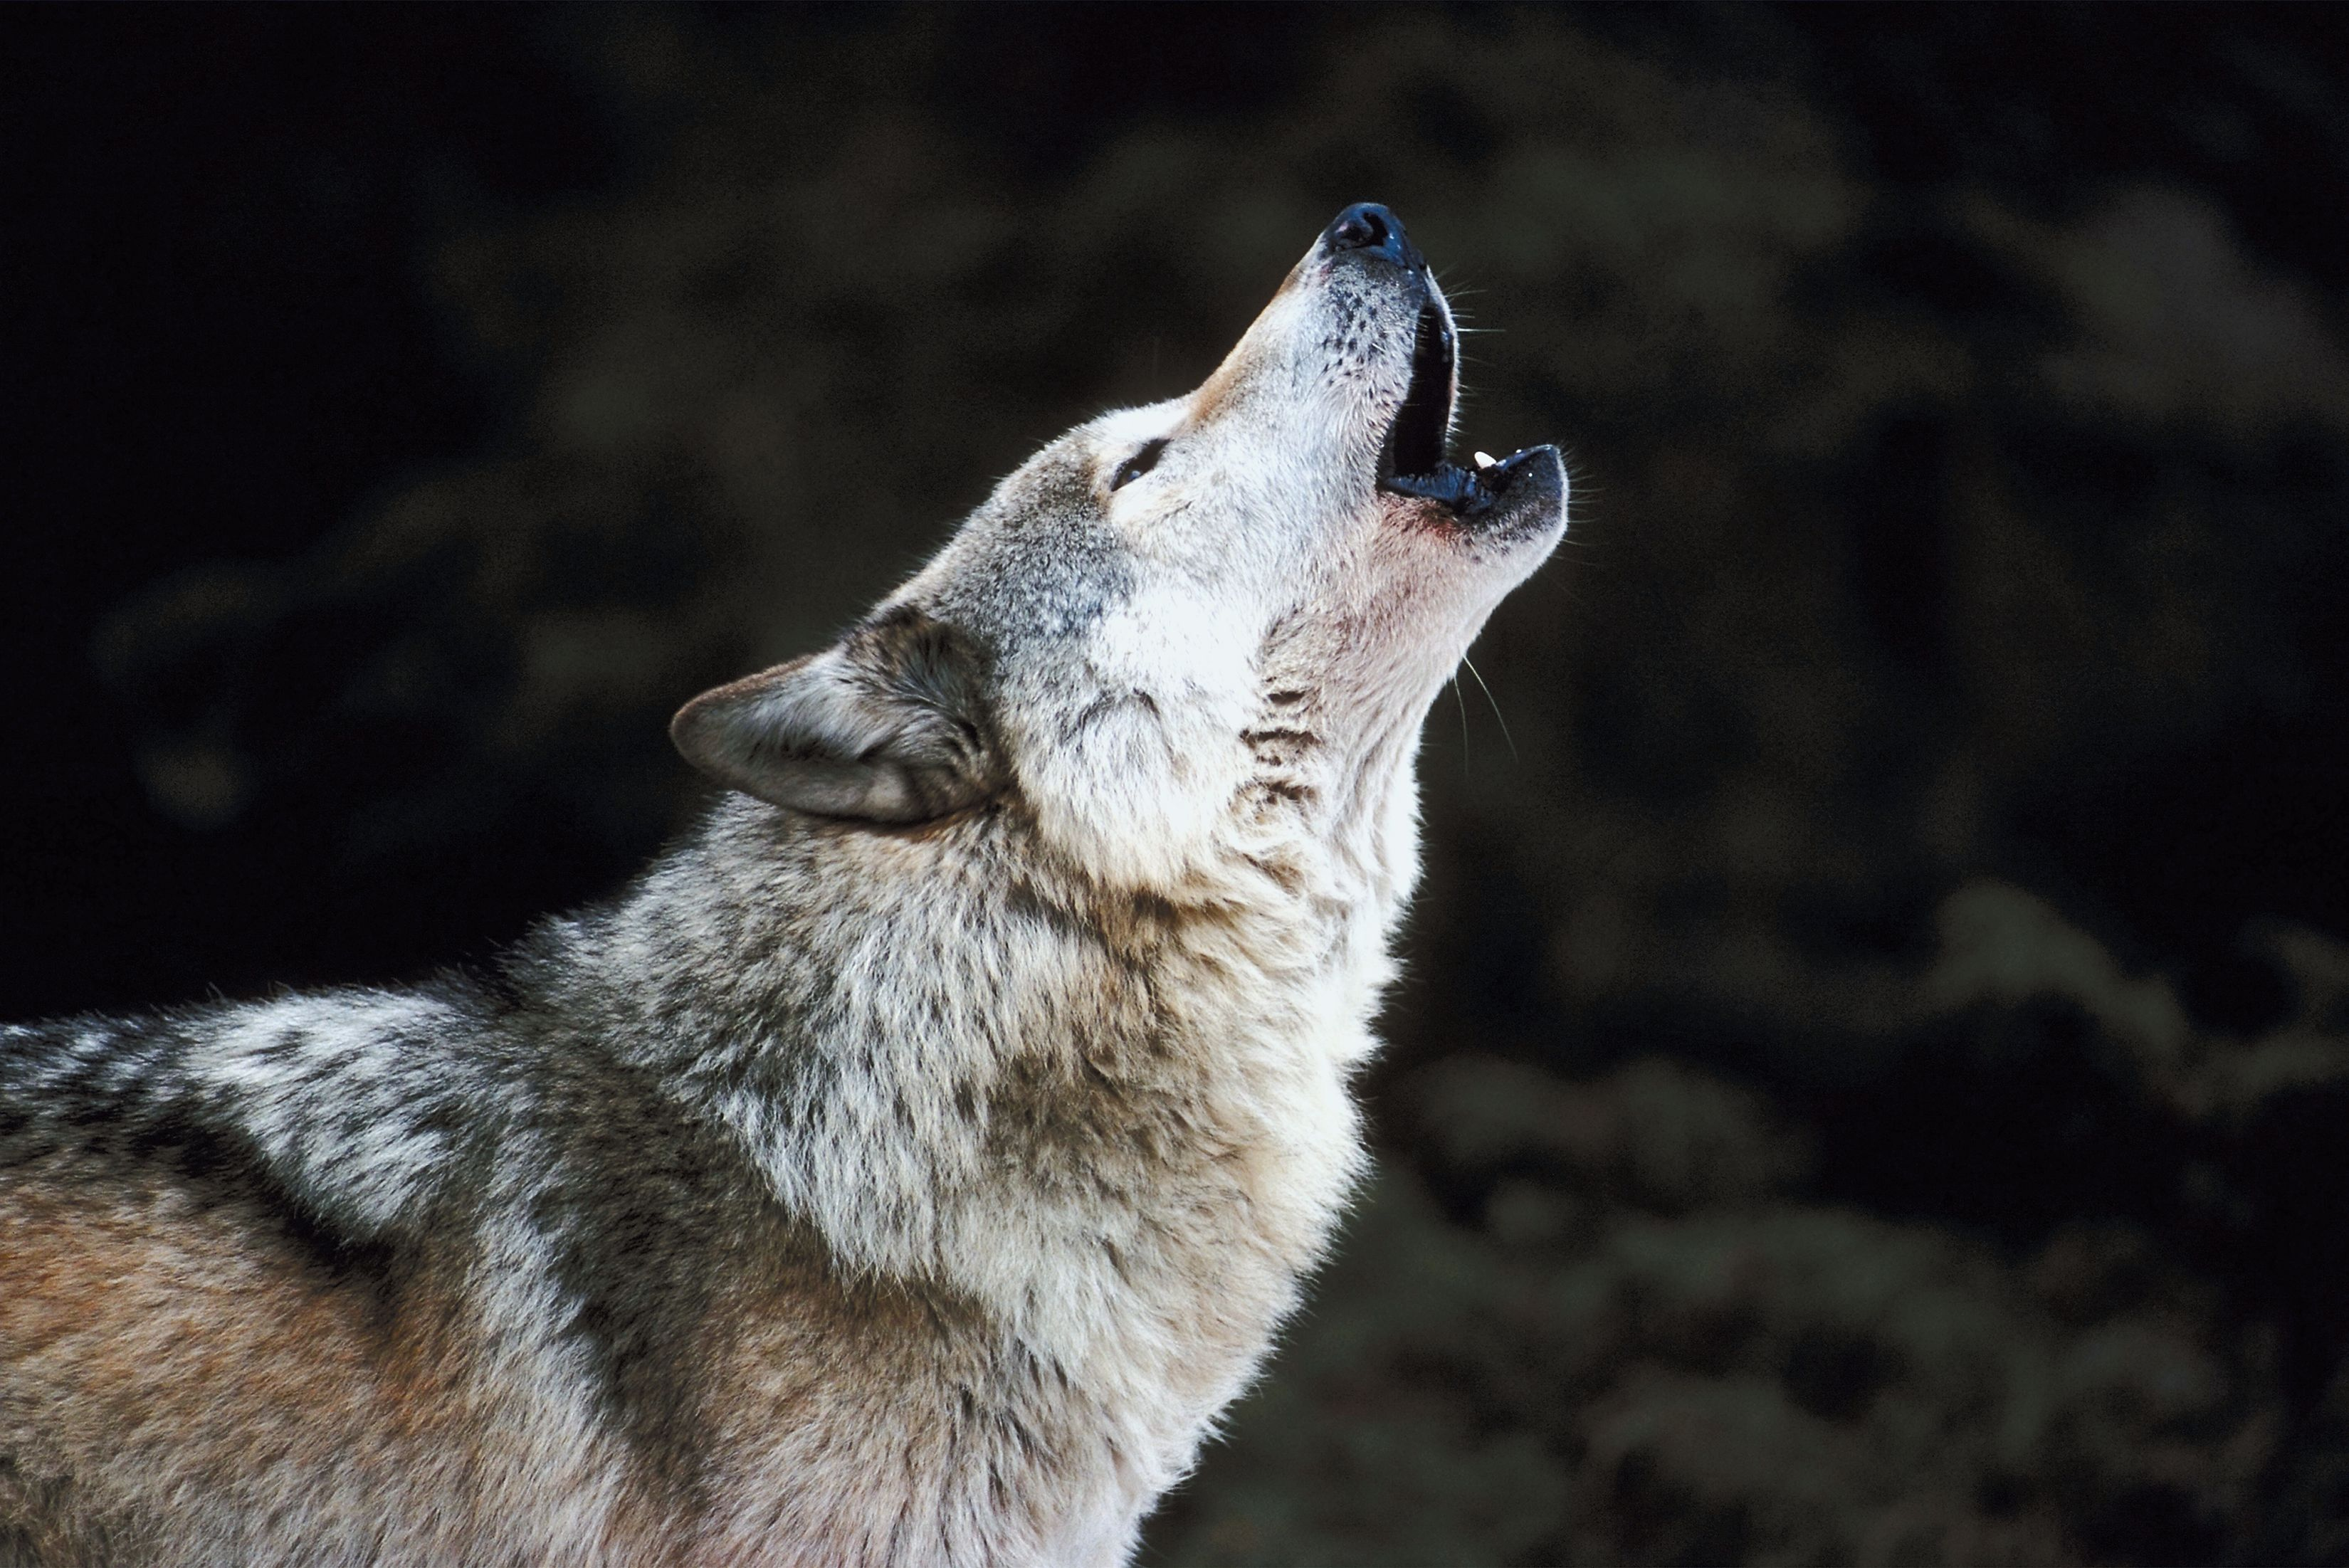 Watch Wolf Howl at Sky in Epic Footage: 'As Wild As They Come'